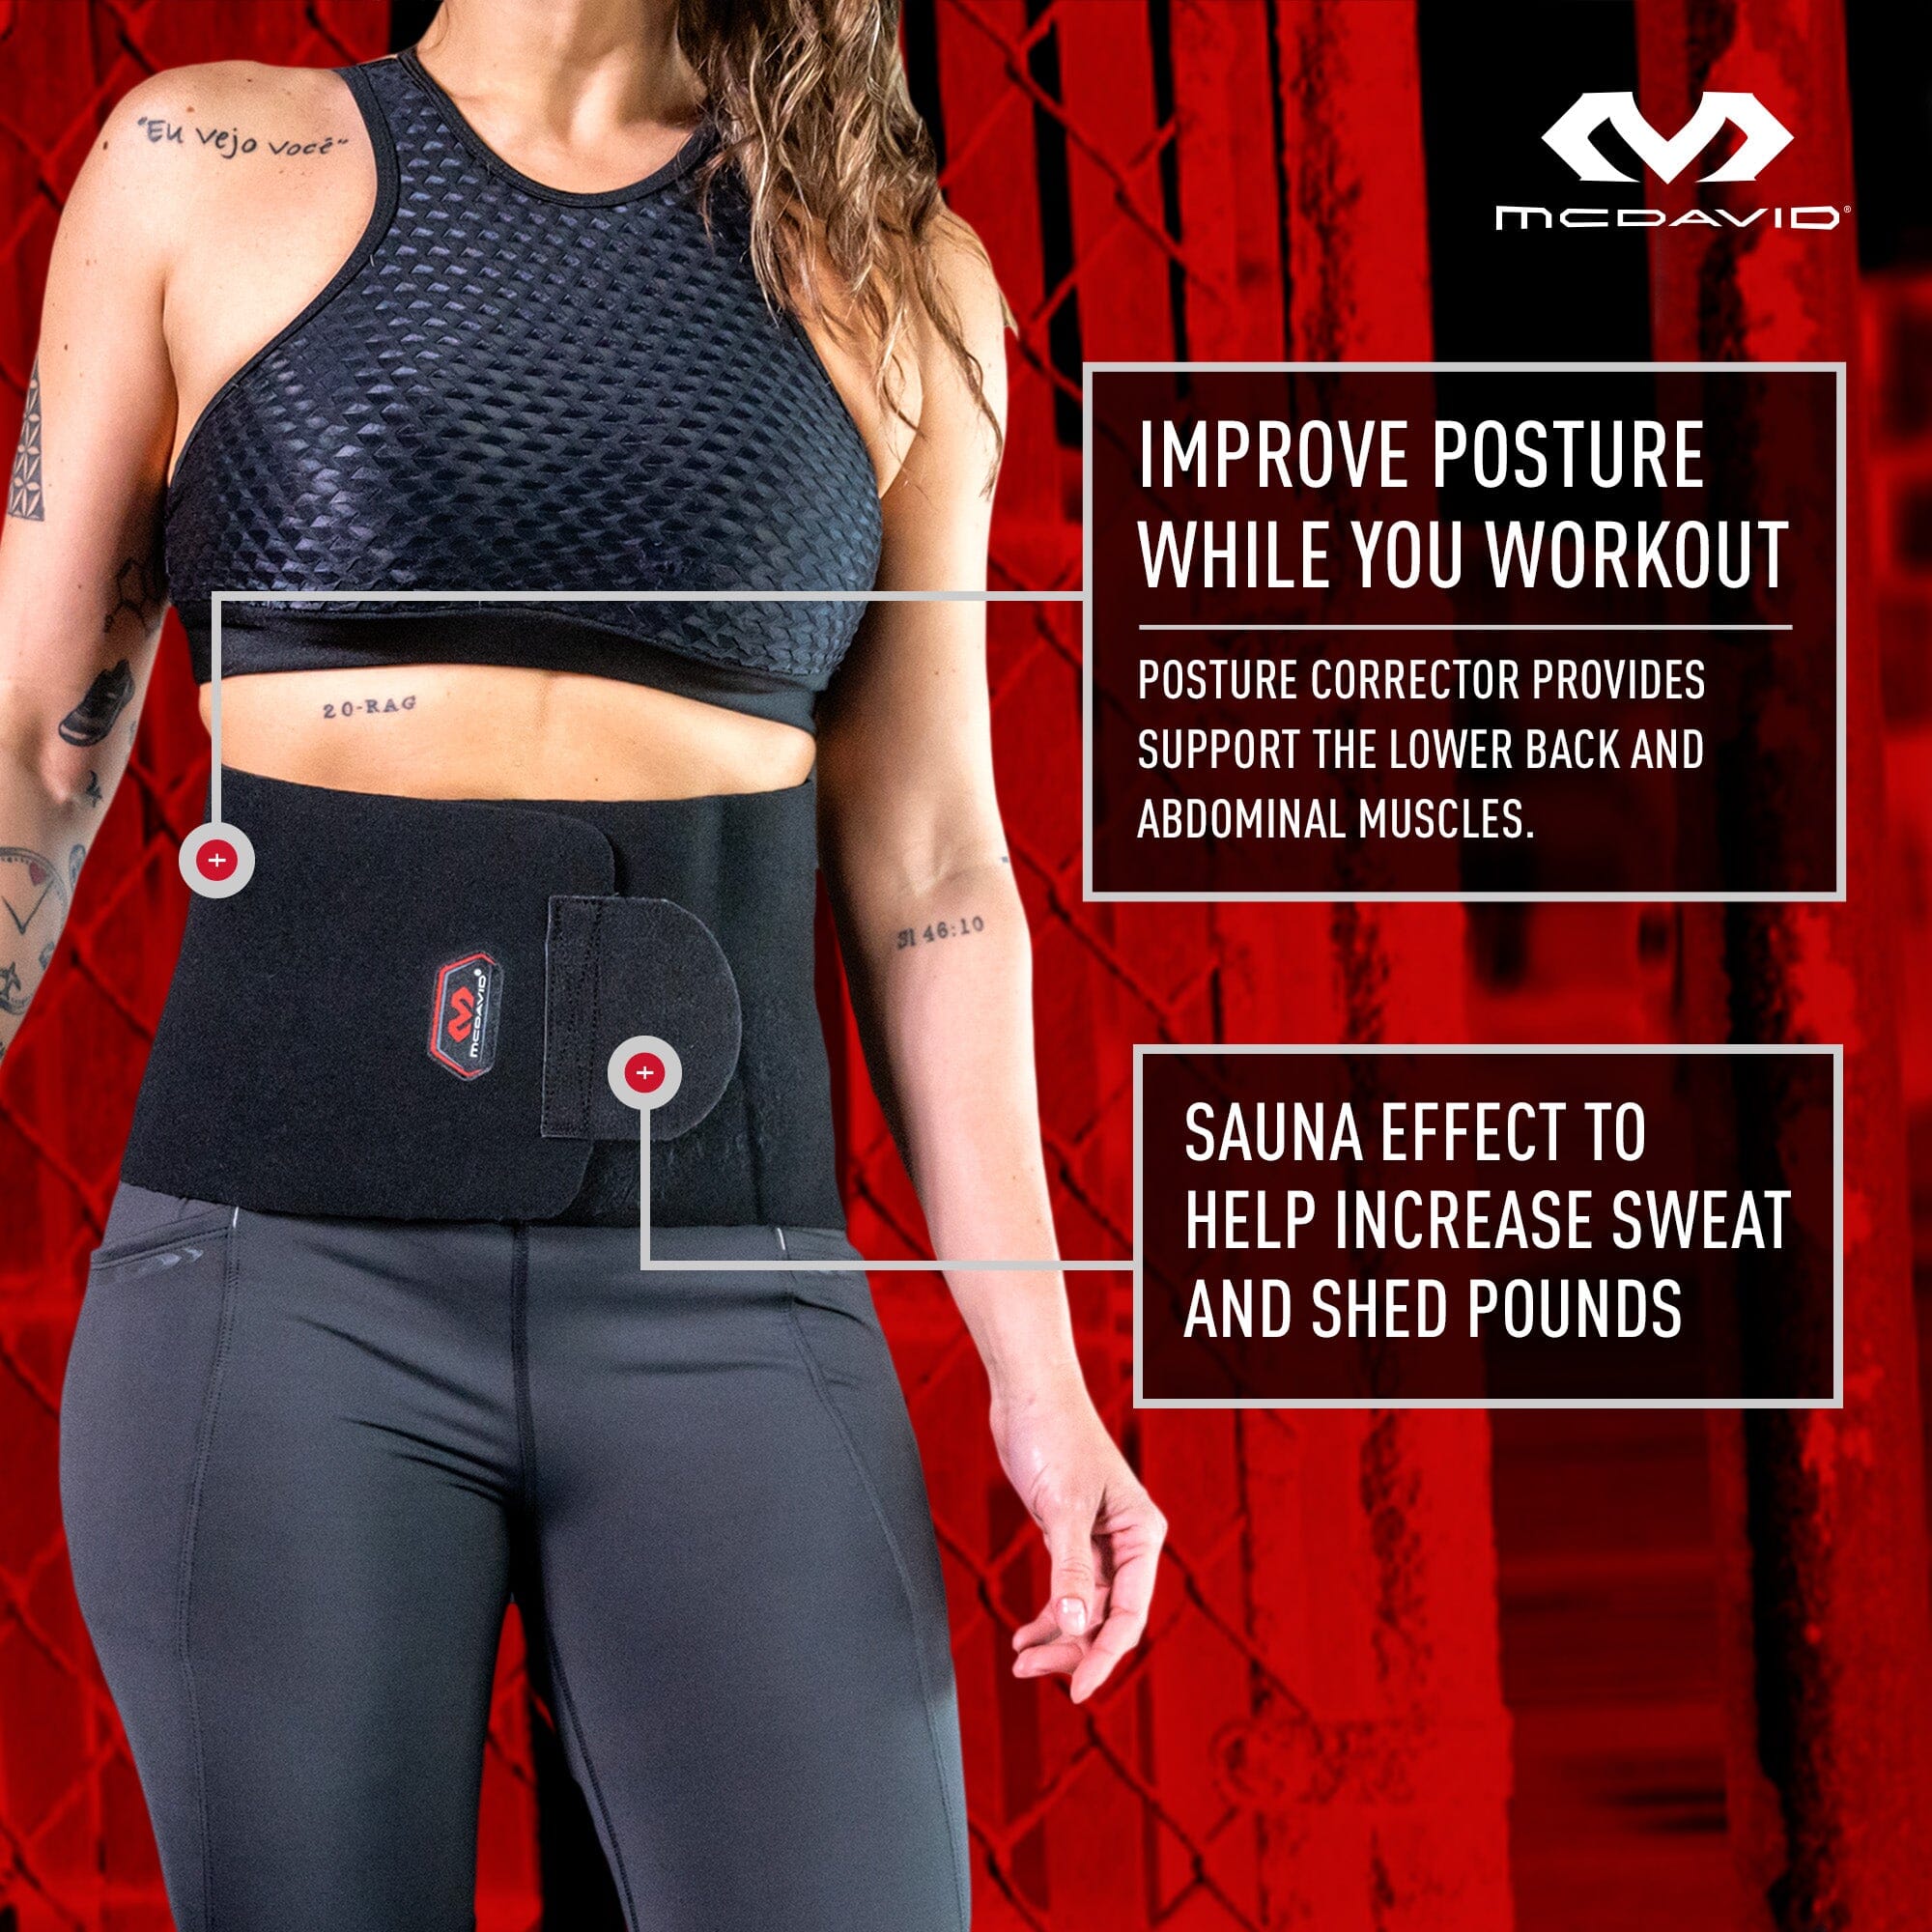 Waist Trainer Belt for Women, Slimmer, Body Shape, Yoga Fitness, Support  Waistband, Loss Weight, Sweaty, Top Quality